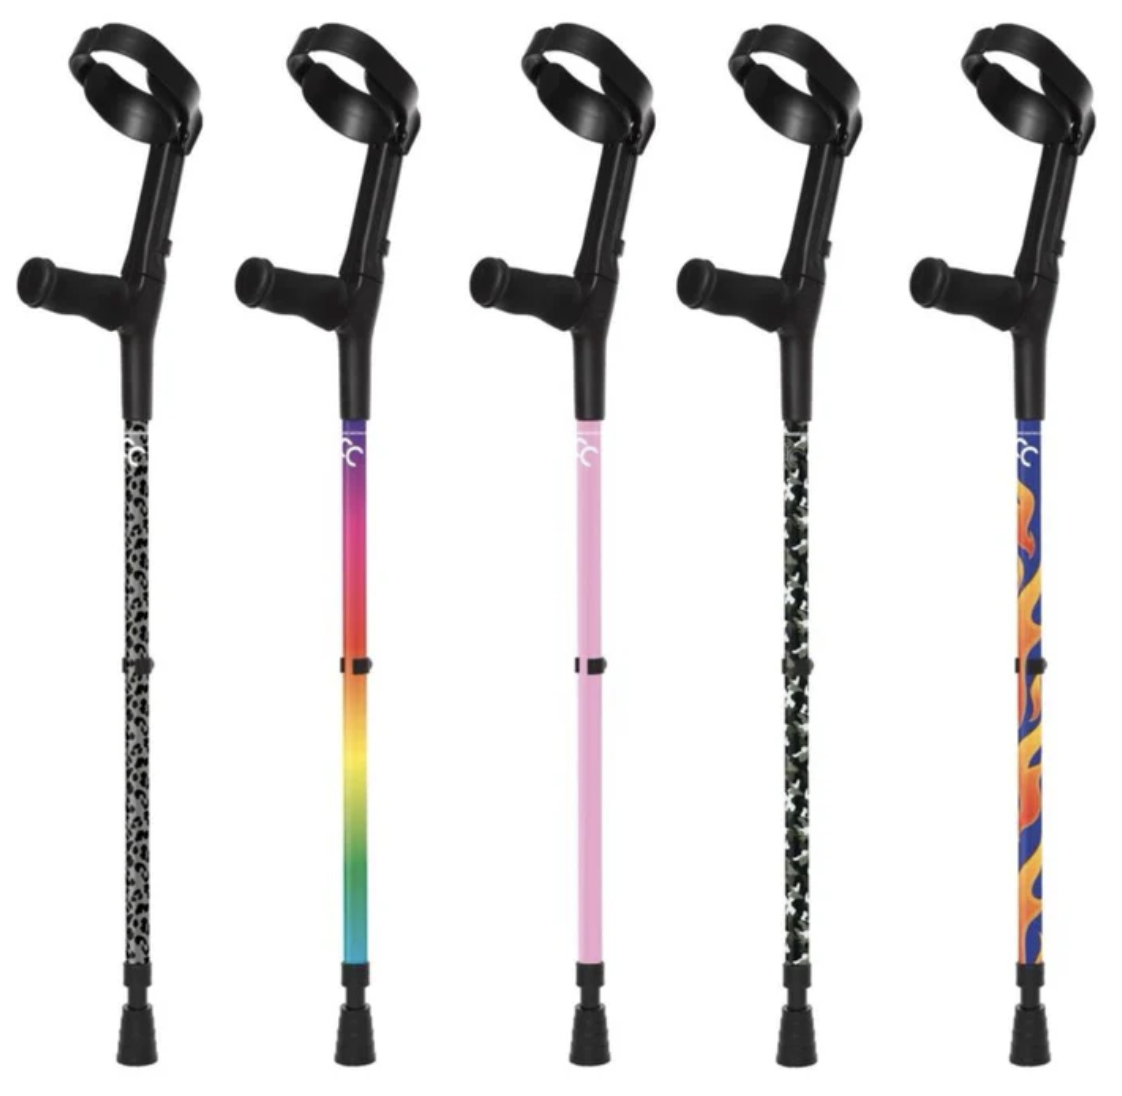 Five forearm crutches on a plain white background. The crutches have sturdy looking black forearm rings and handles. From left to right the designs on the crutch poles are: black leopard, rainbow, pink, camo, and orange flame on bright blue background. 